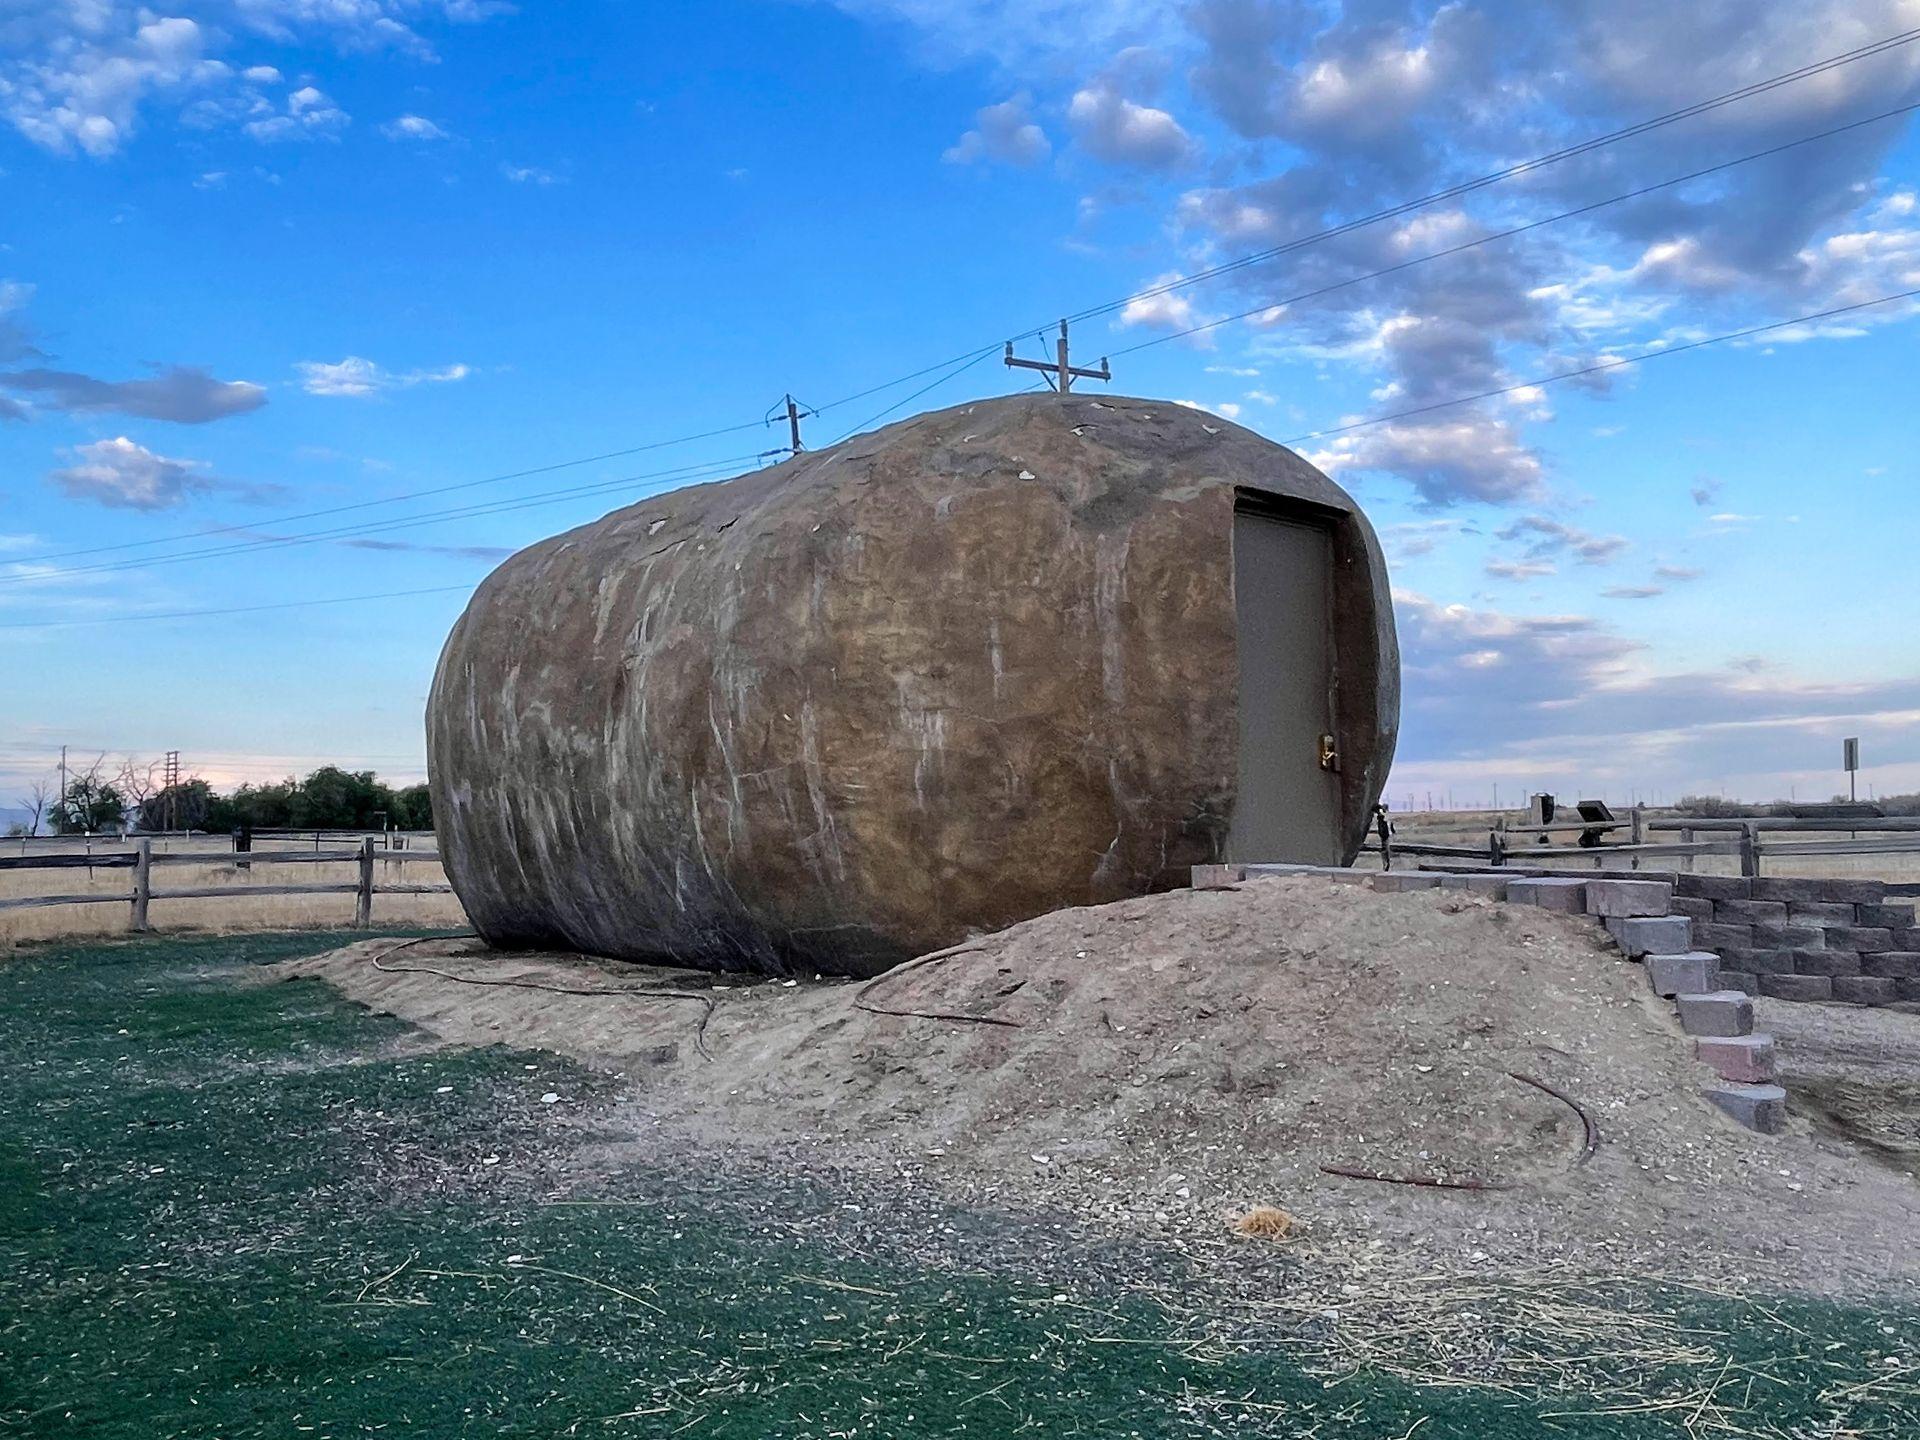 A large potato that can be rented on Airbnb